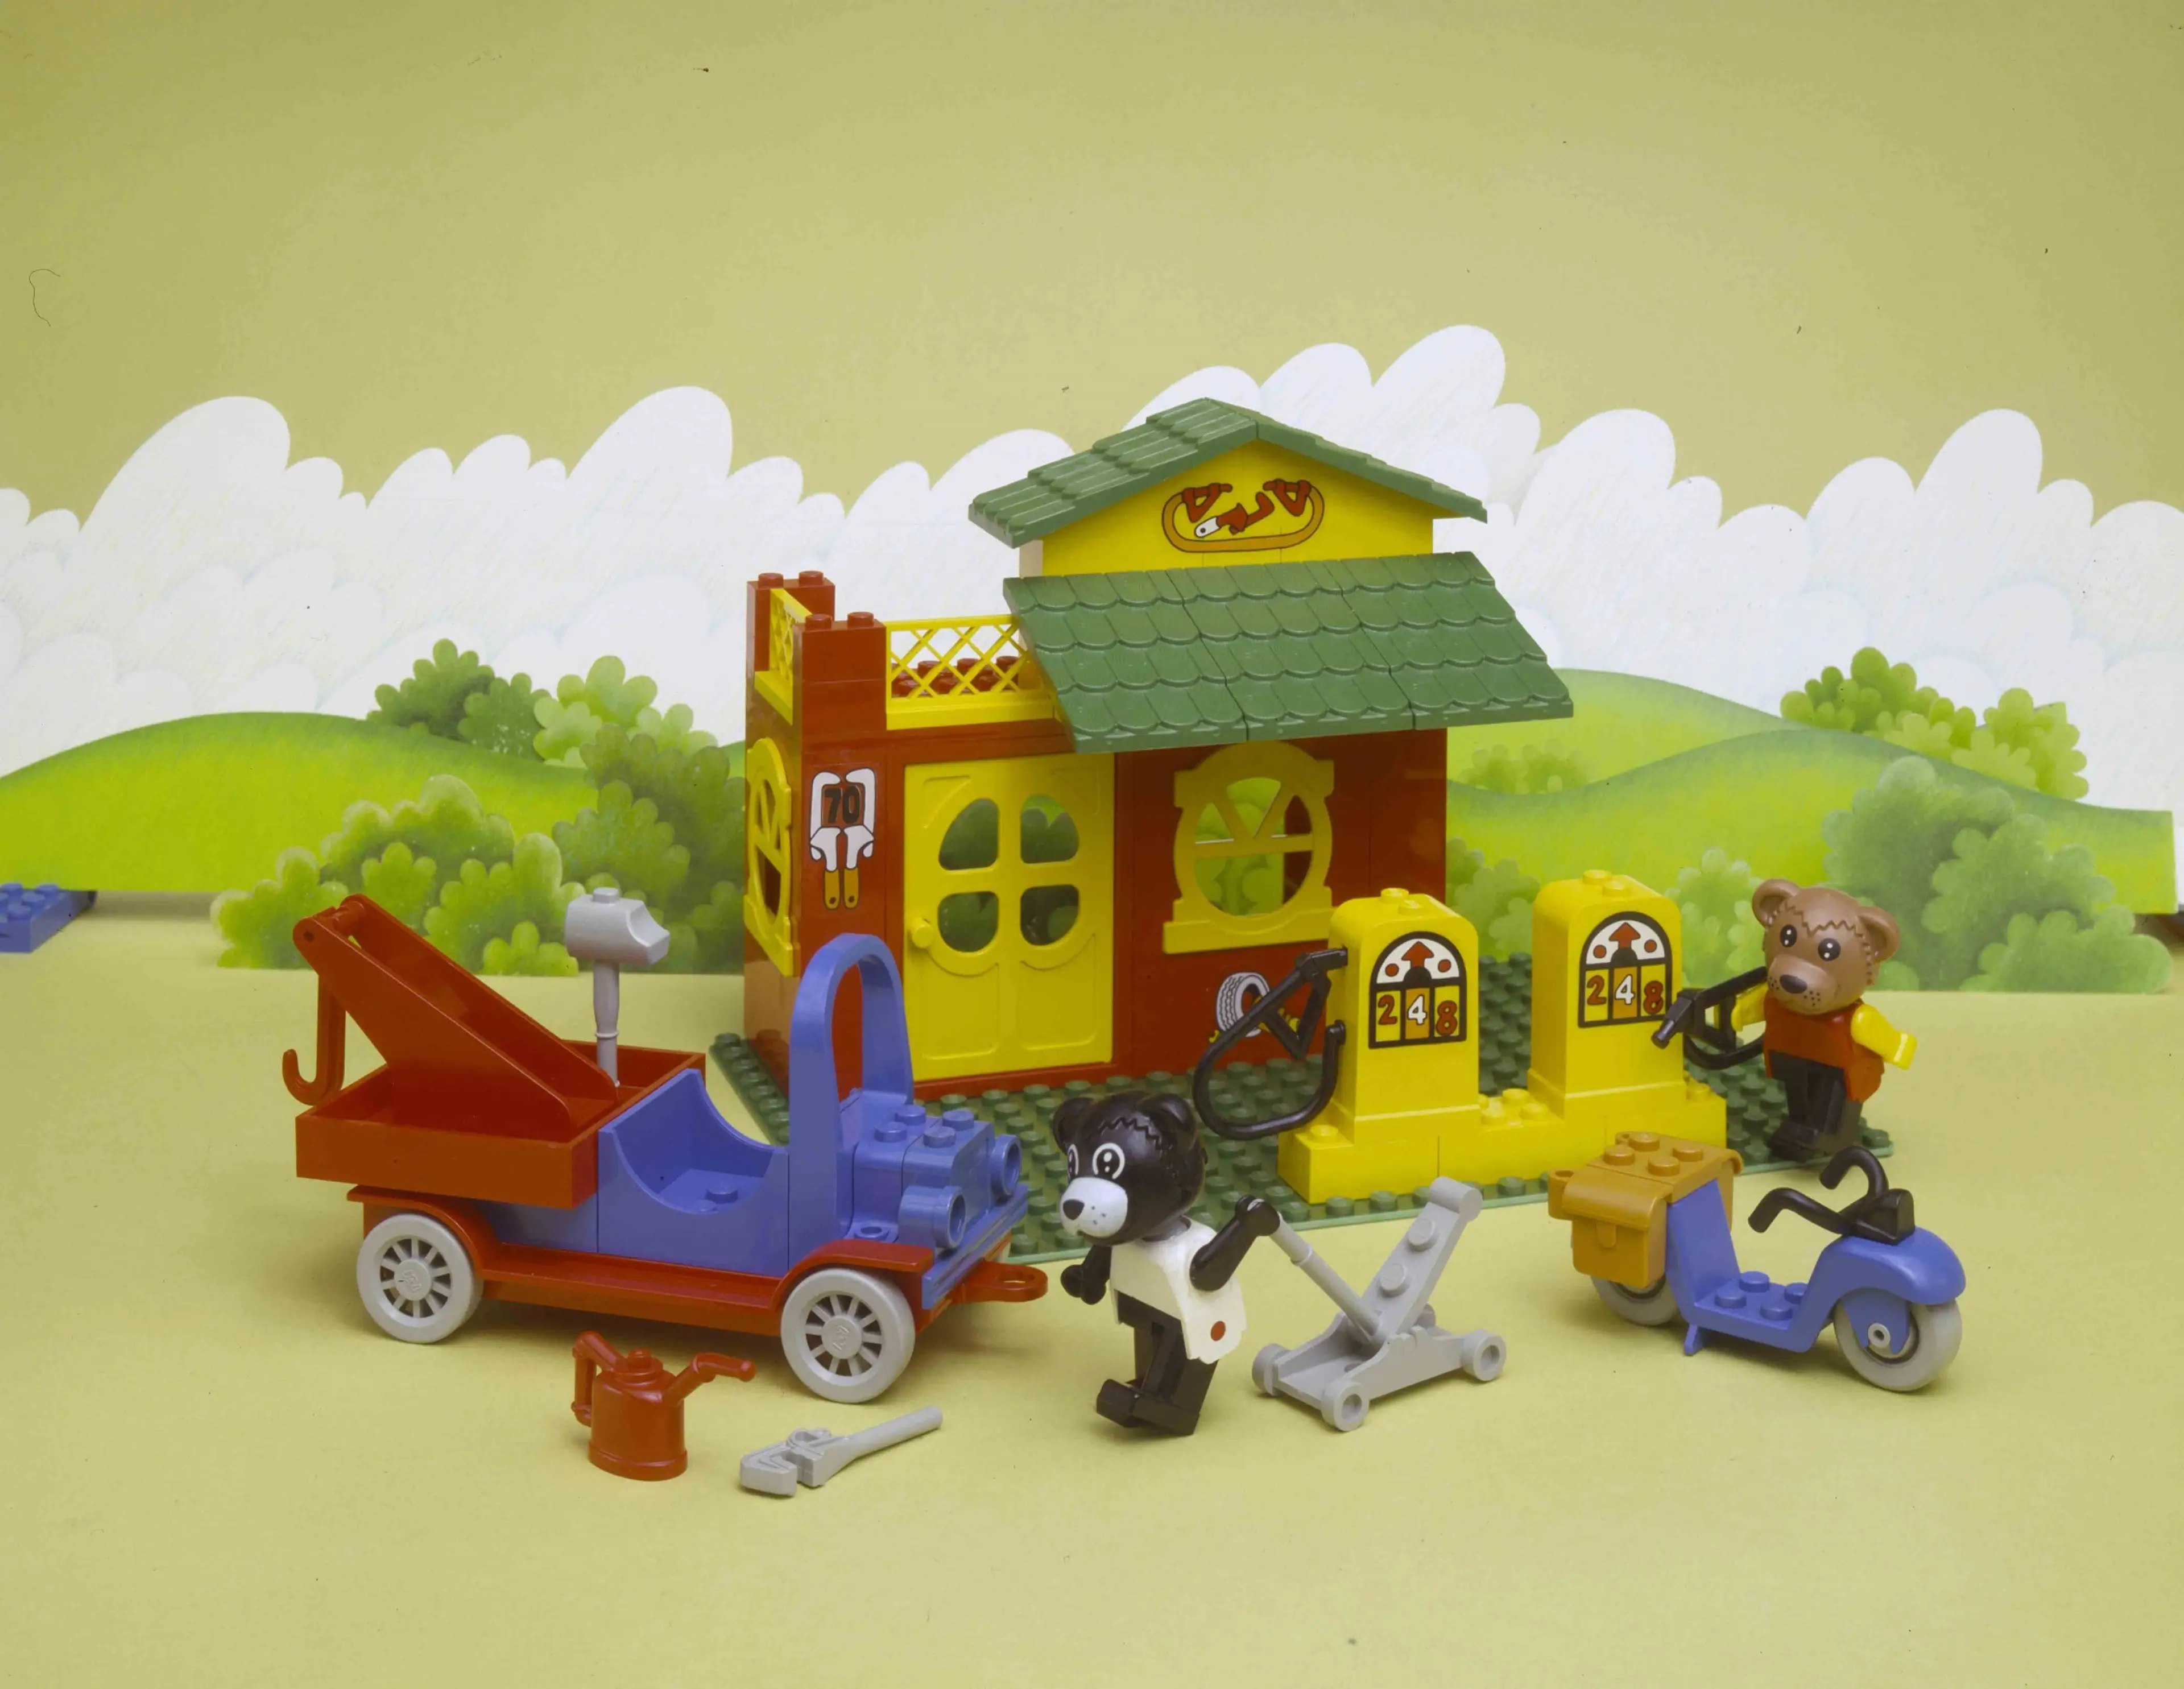 LEGO FABULAND gas station including two characters and a truck